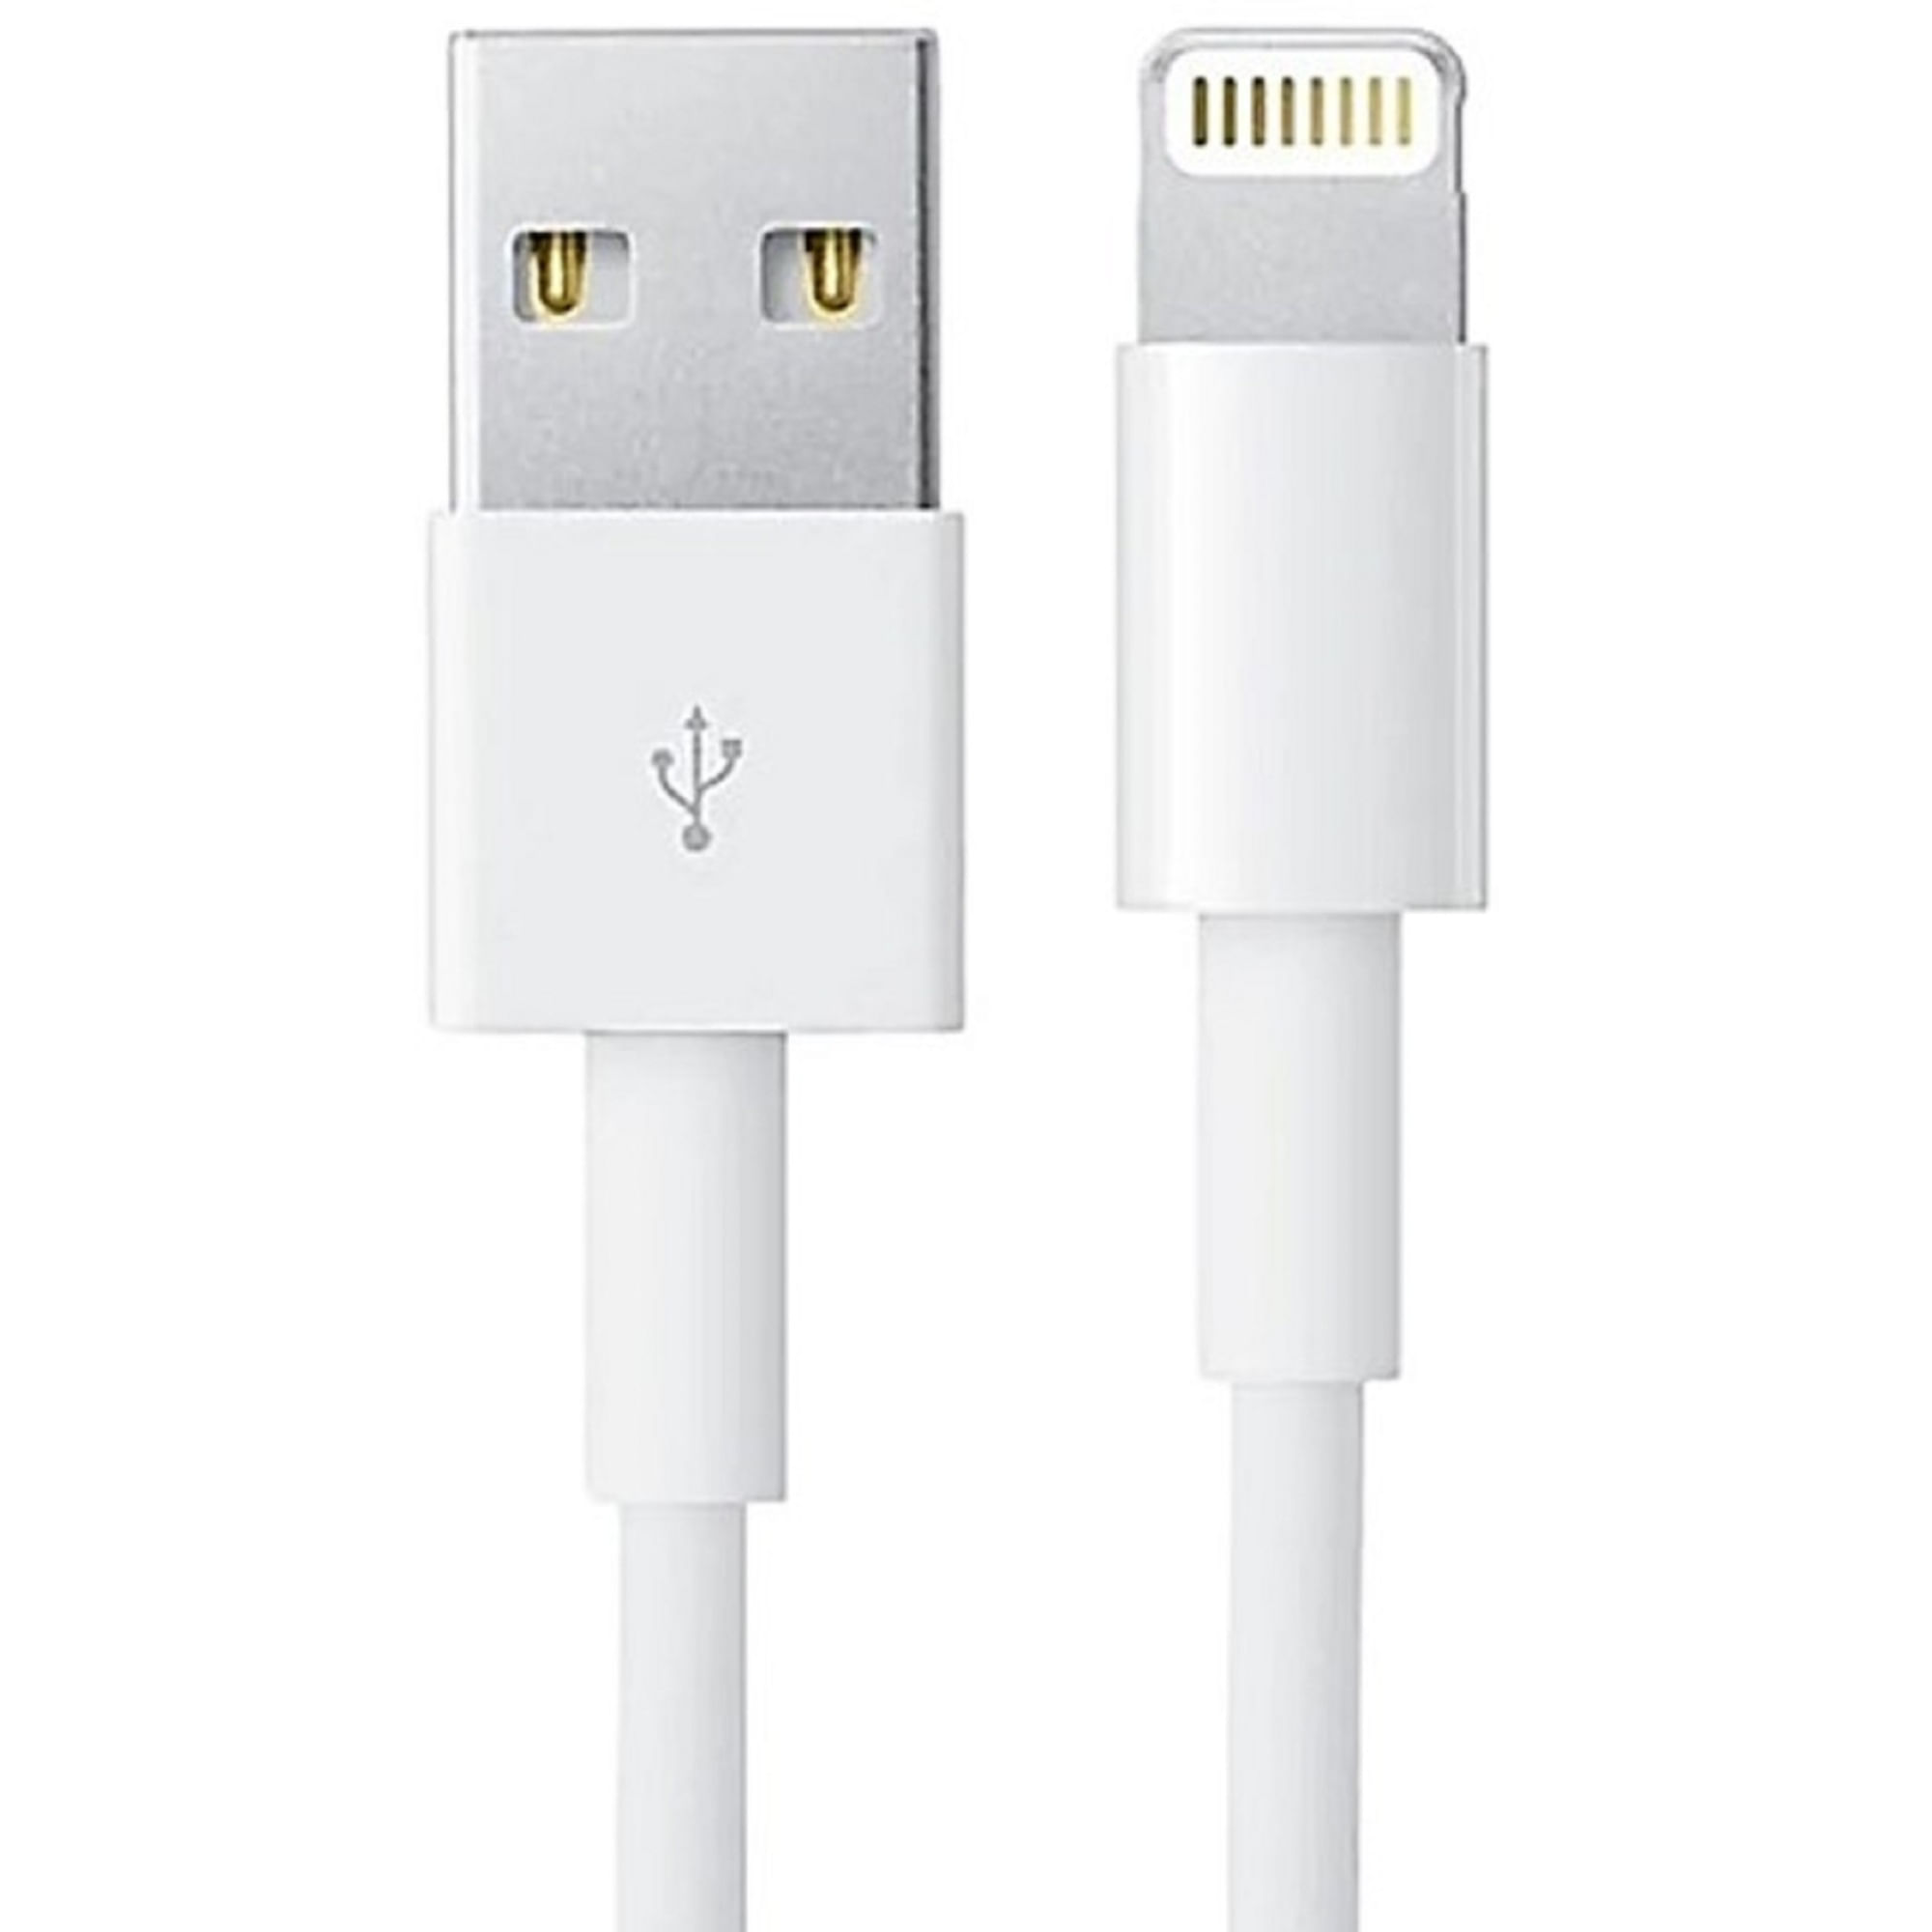 Cable Compatible con iPhone iPad iPod AirPods 1m 8-pin 2amp carga rápida